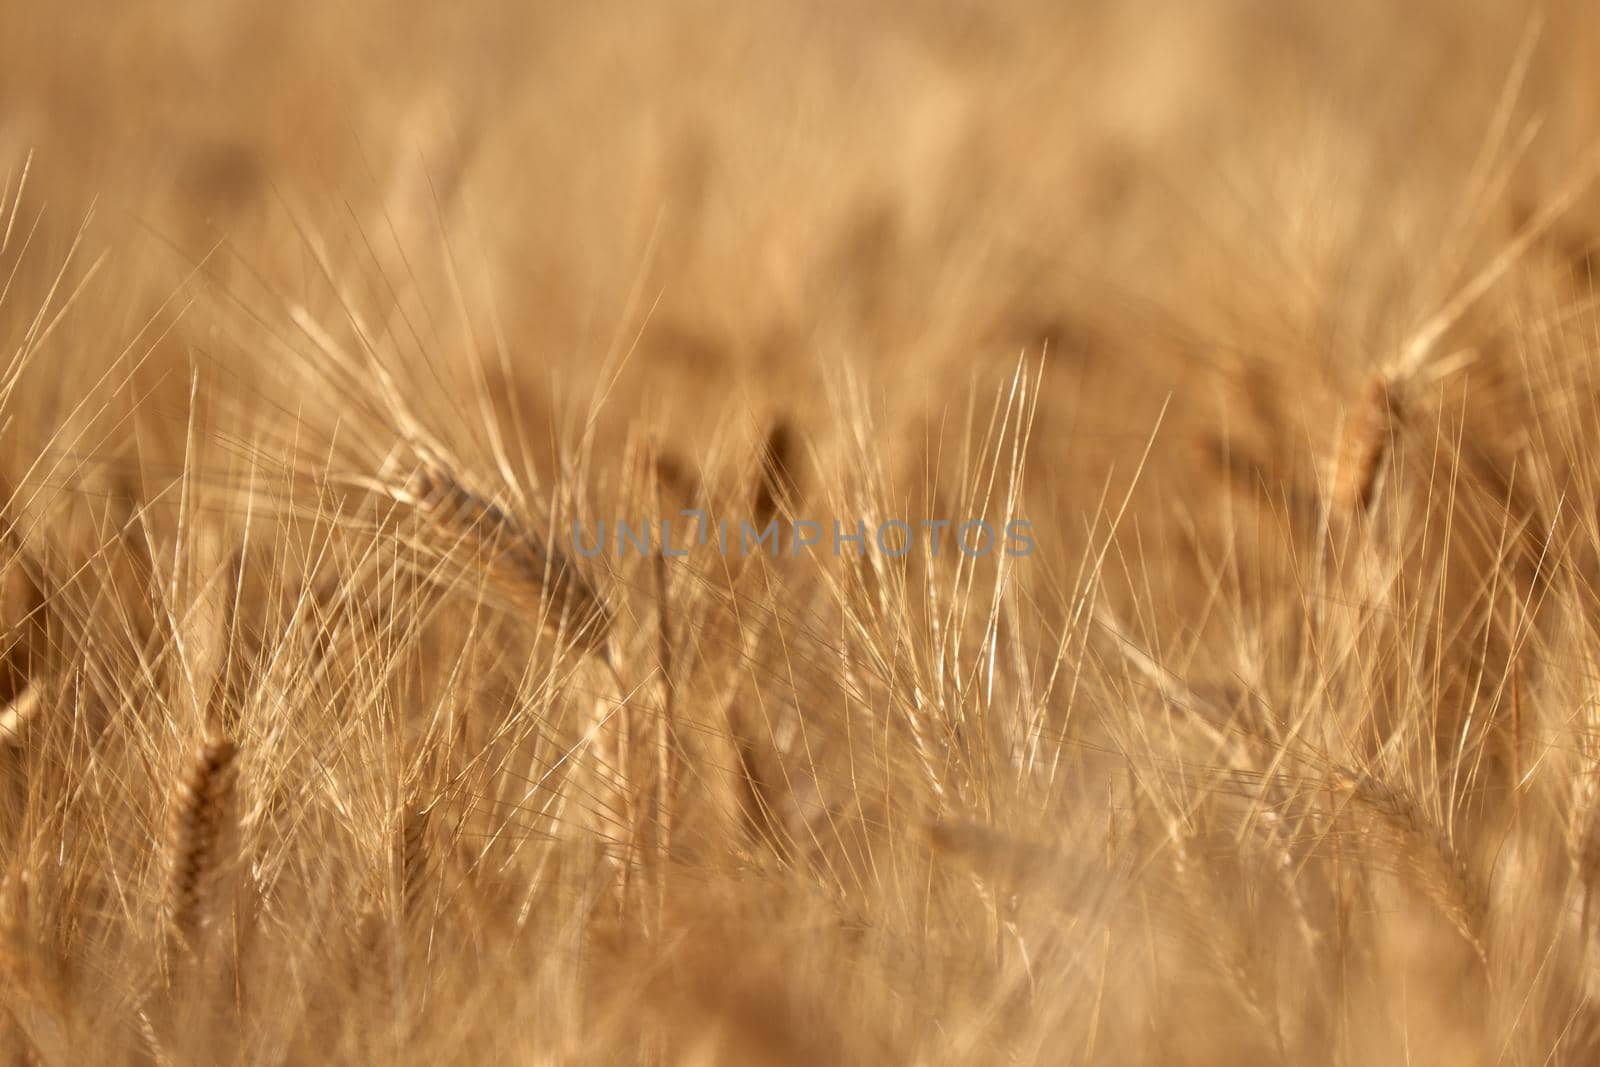 Wheat ears in the field, food background. Ears of wheat ripen in the field. Wheat field, agriculture, agricultural background. Ecological clean food, food safety. by EvgeniyQW